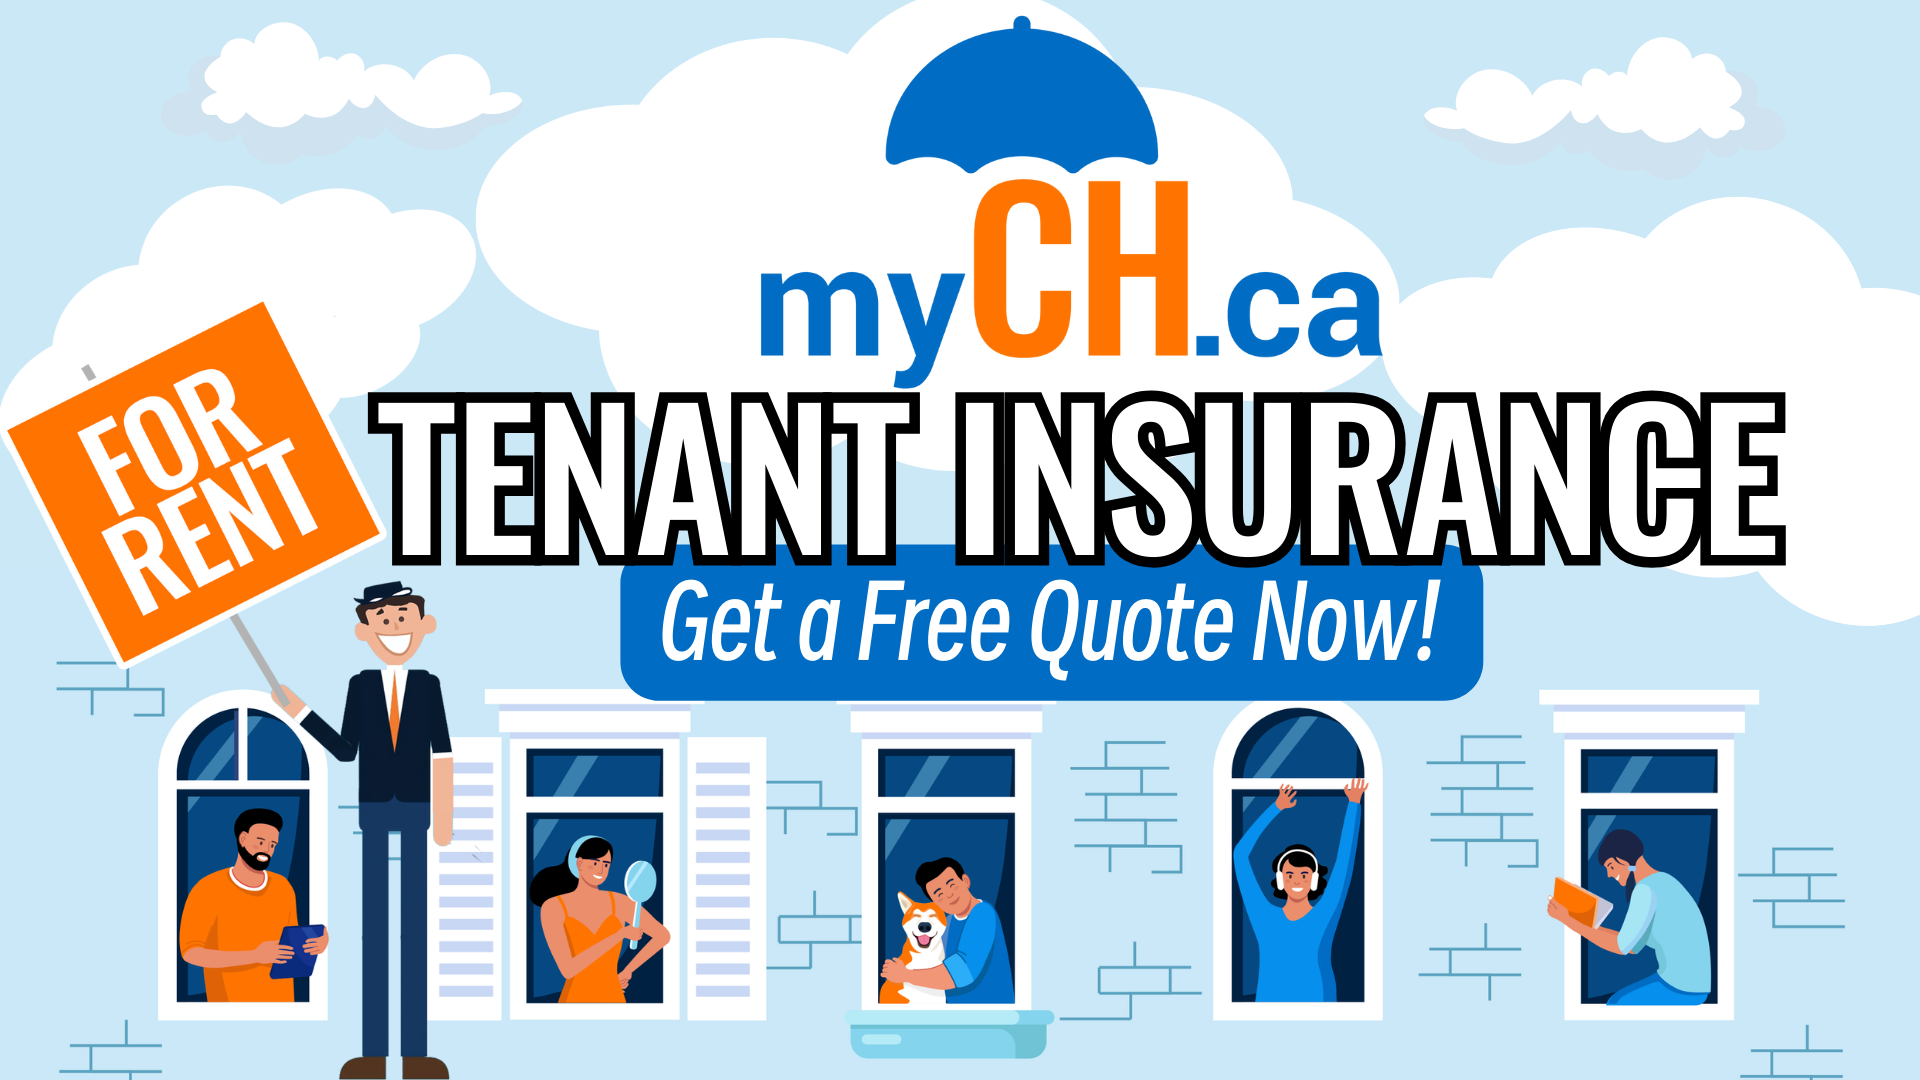 Tenant Insurance - Get a Free Quote Now!